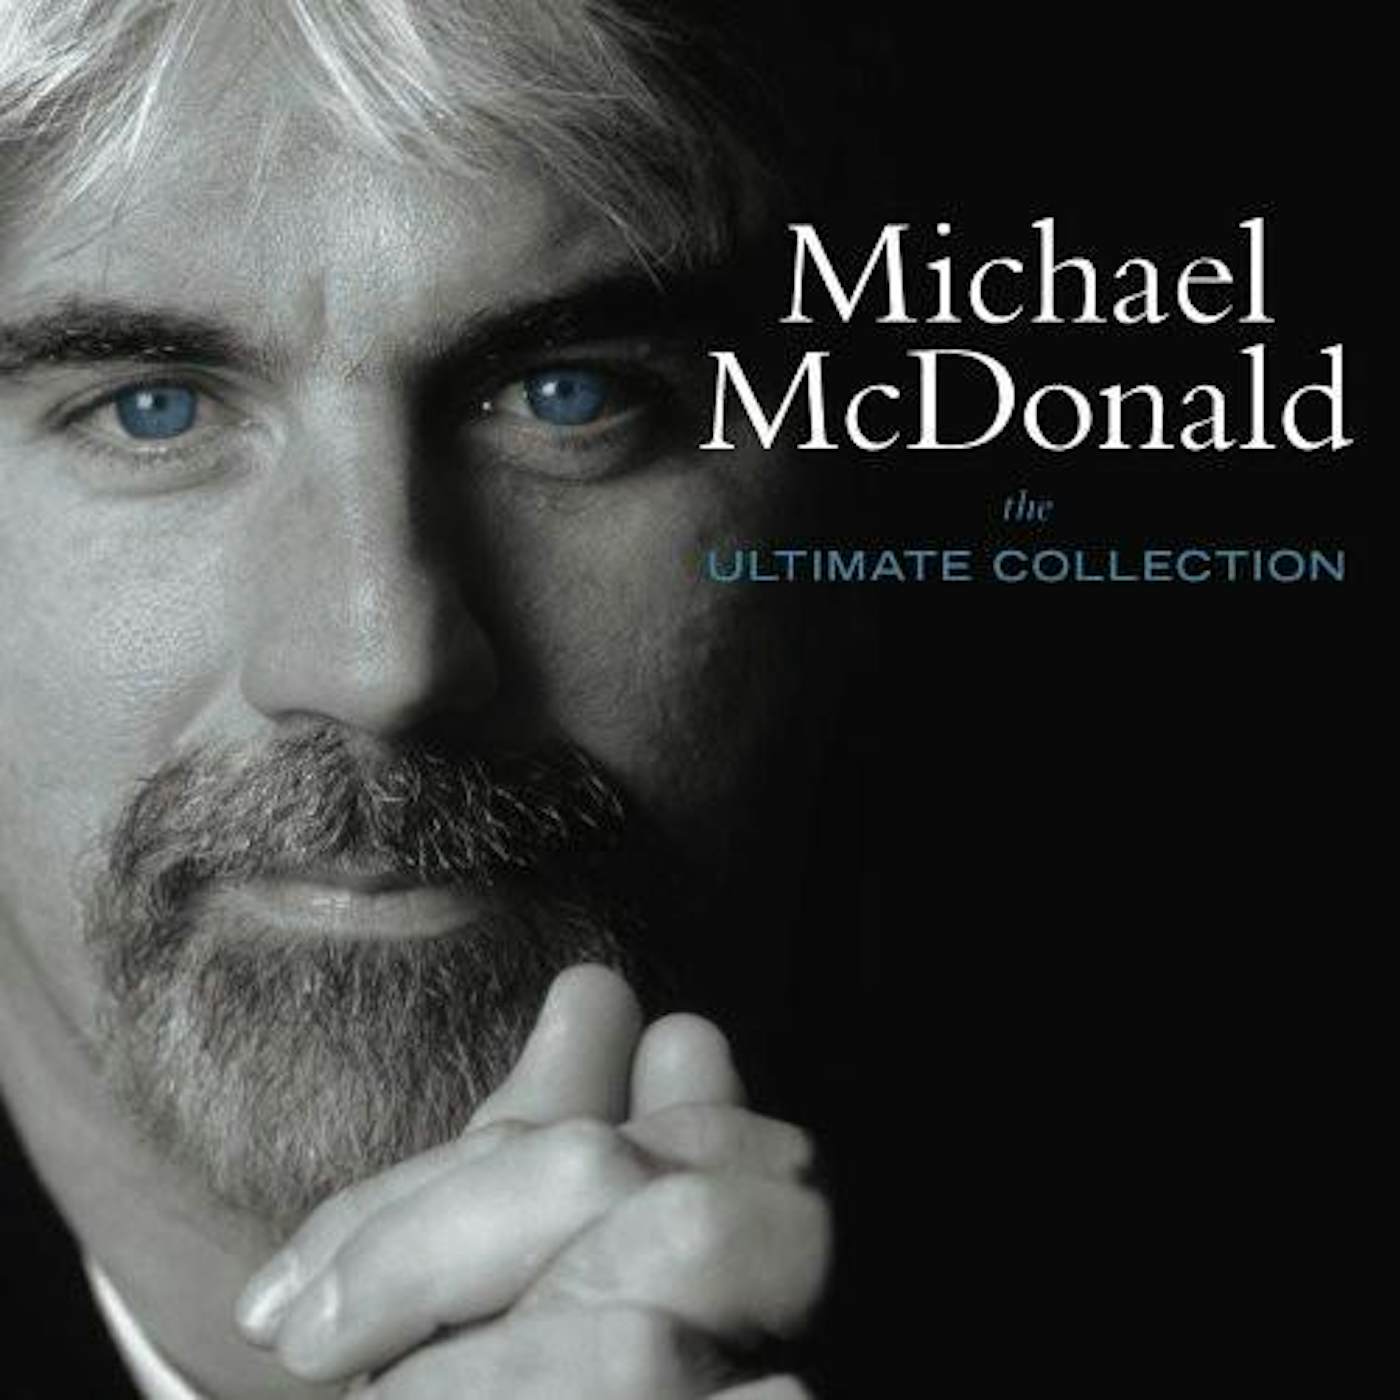 Michael McDonald ULTIMATE COLLECTION CD